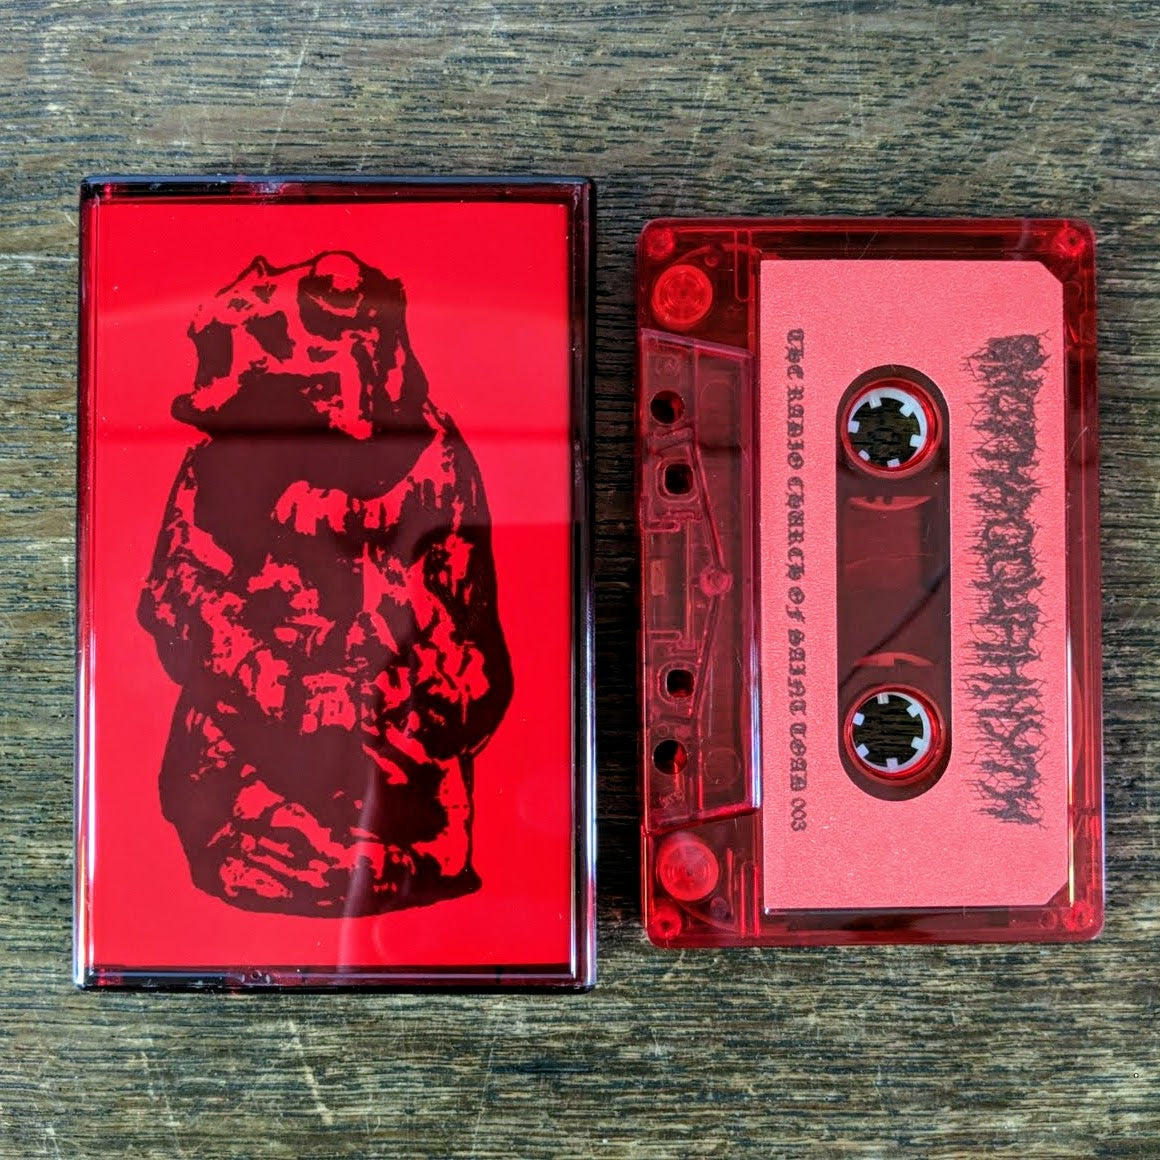 [SOLD OUT] ZHOTHAQQUAHNYTH "Black Synthesizer Doom" Cassette Tape